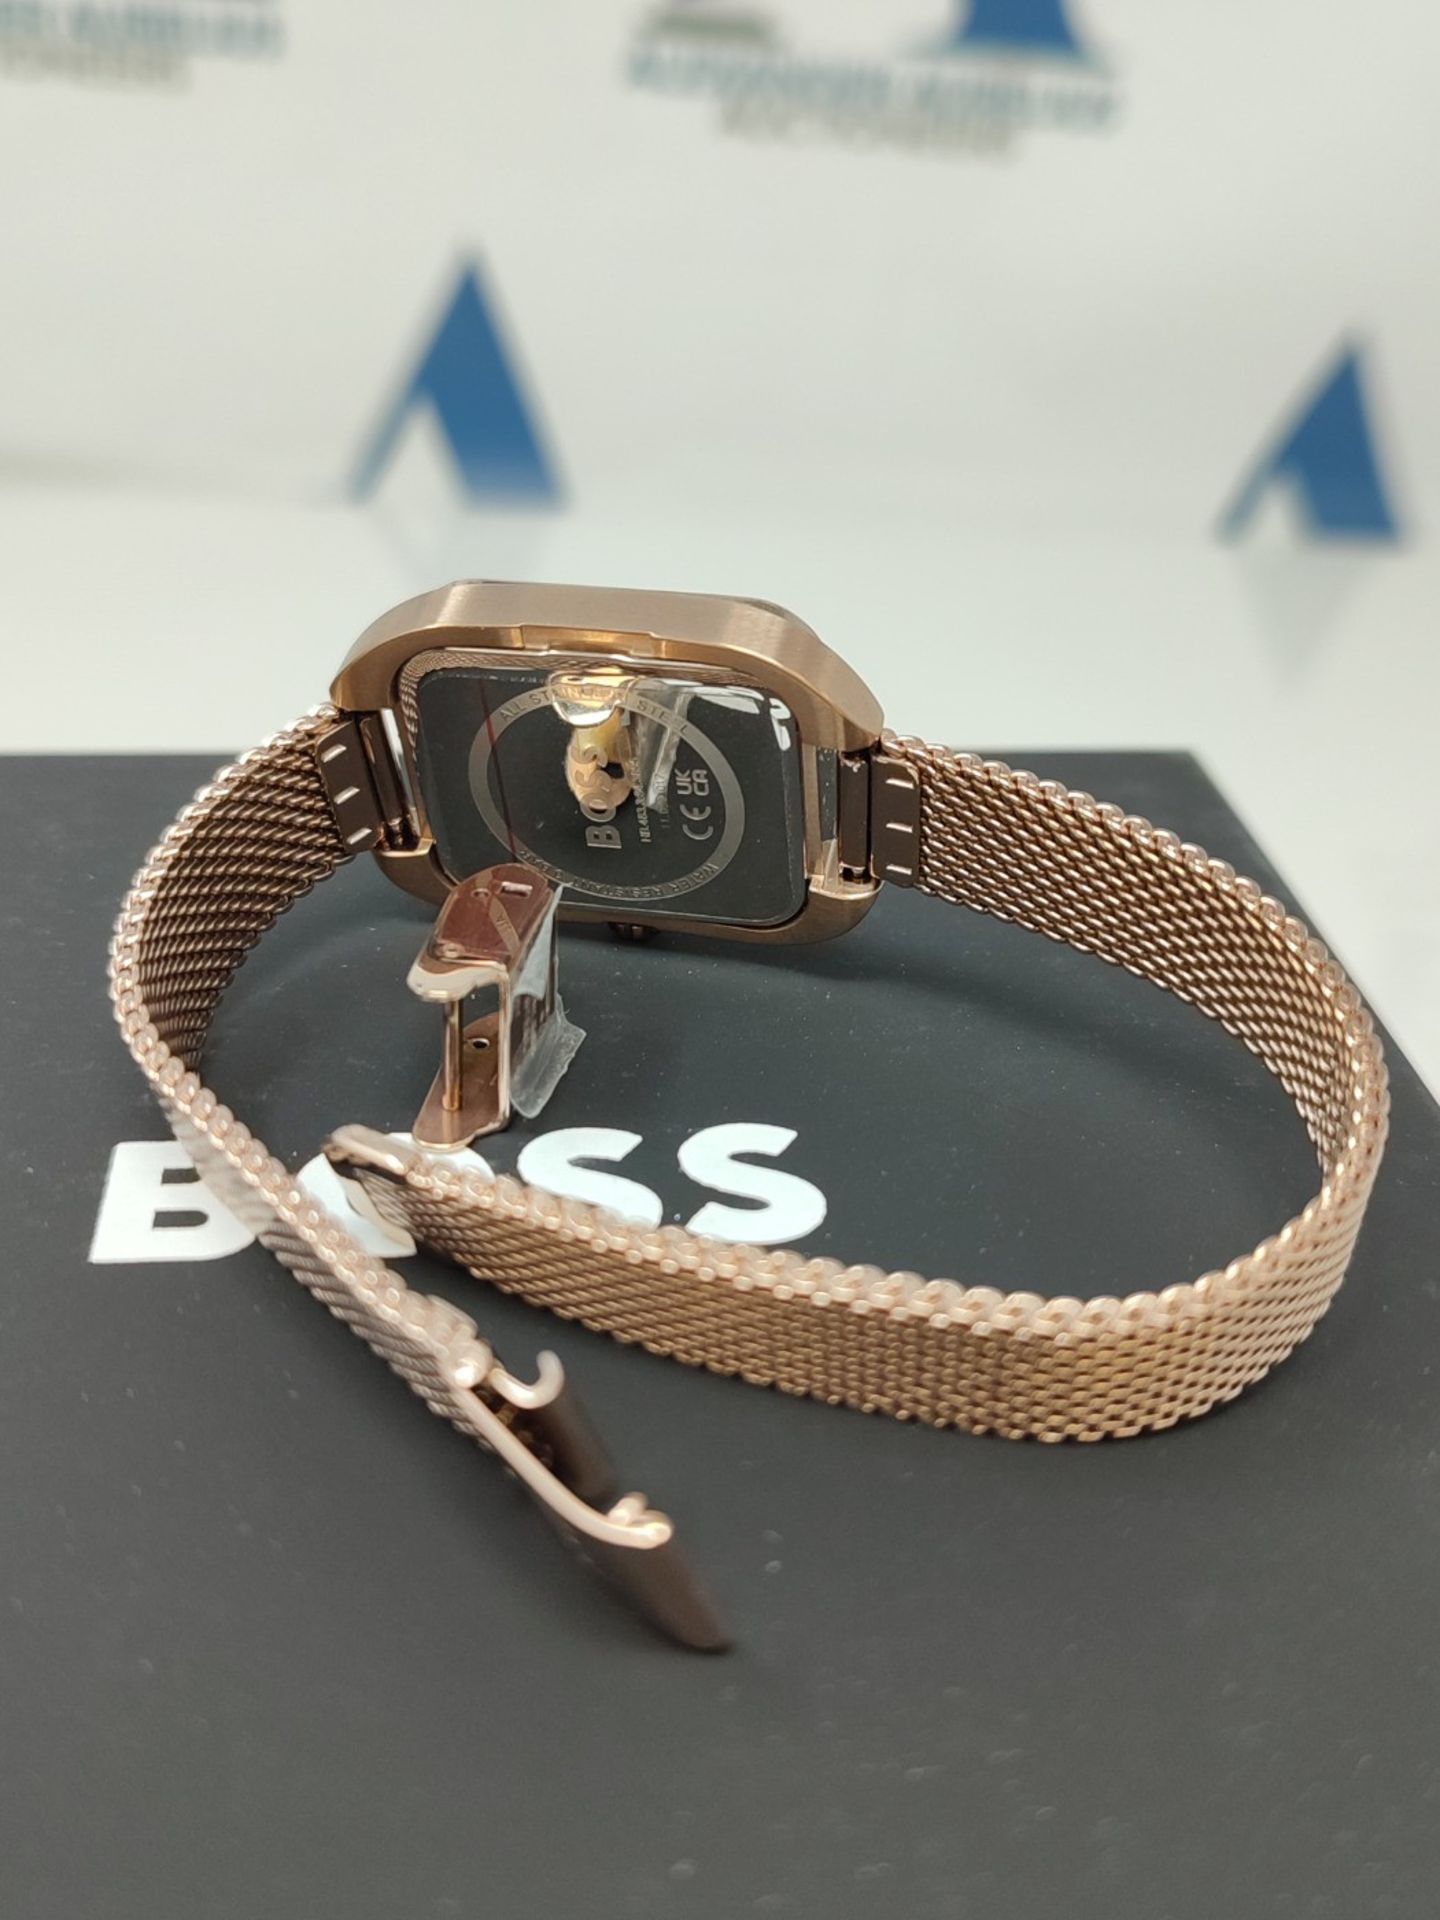 RRP £279.00 BOSS Analog quartz watch for women with rose gold stainless steel bracelet - 1502683 - Image 3 of 6